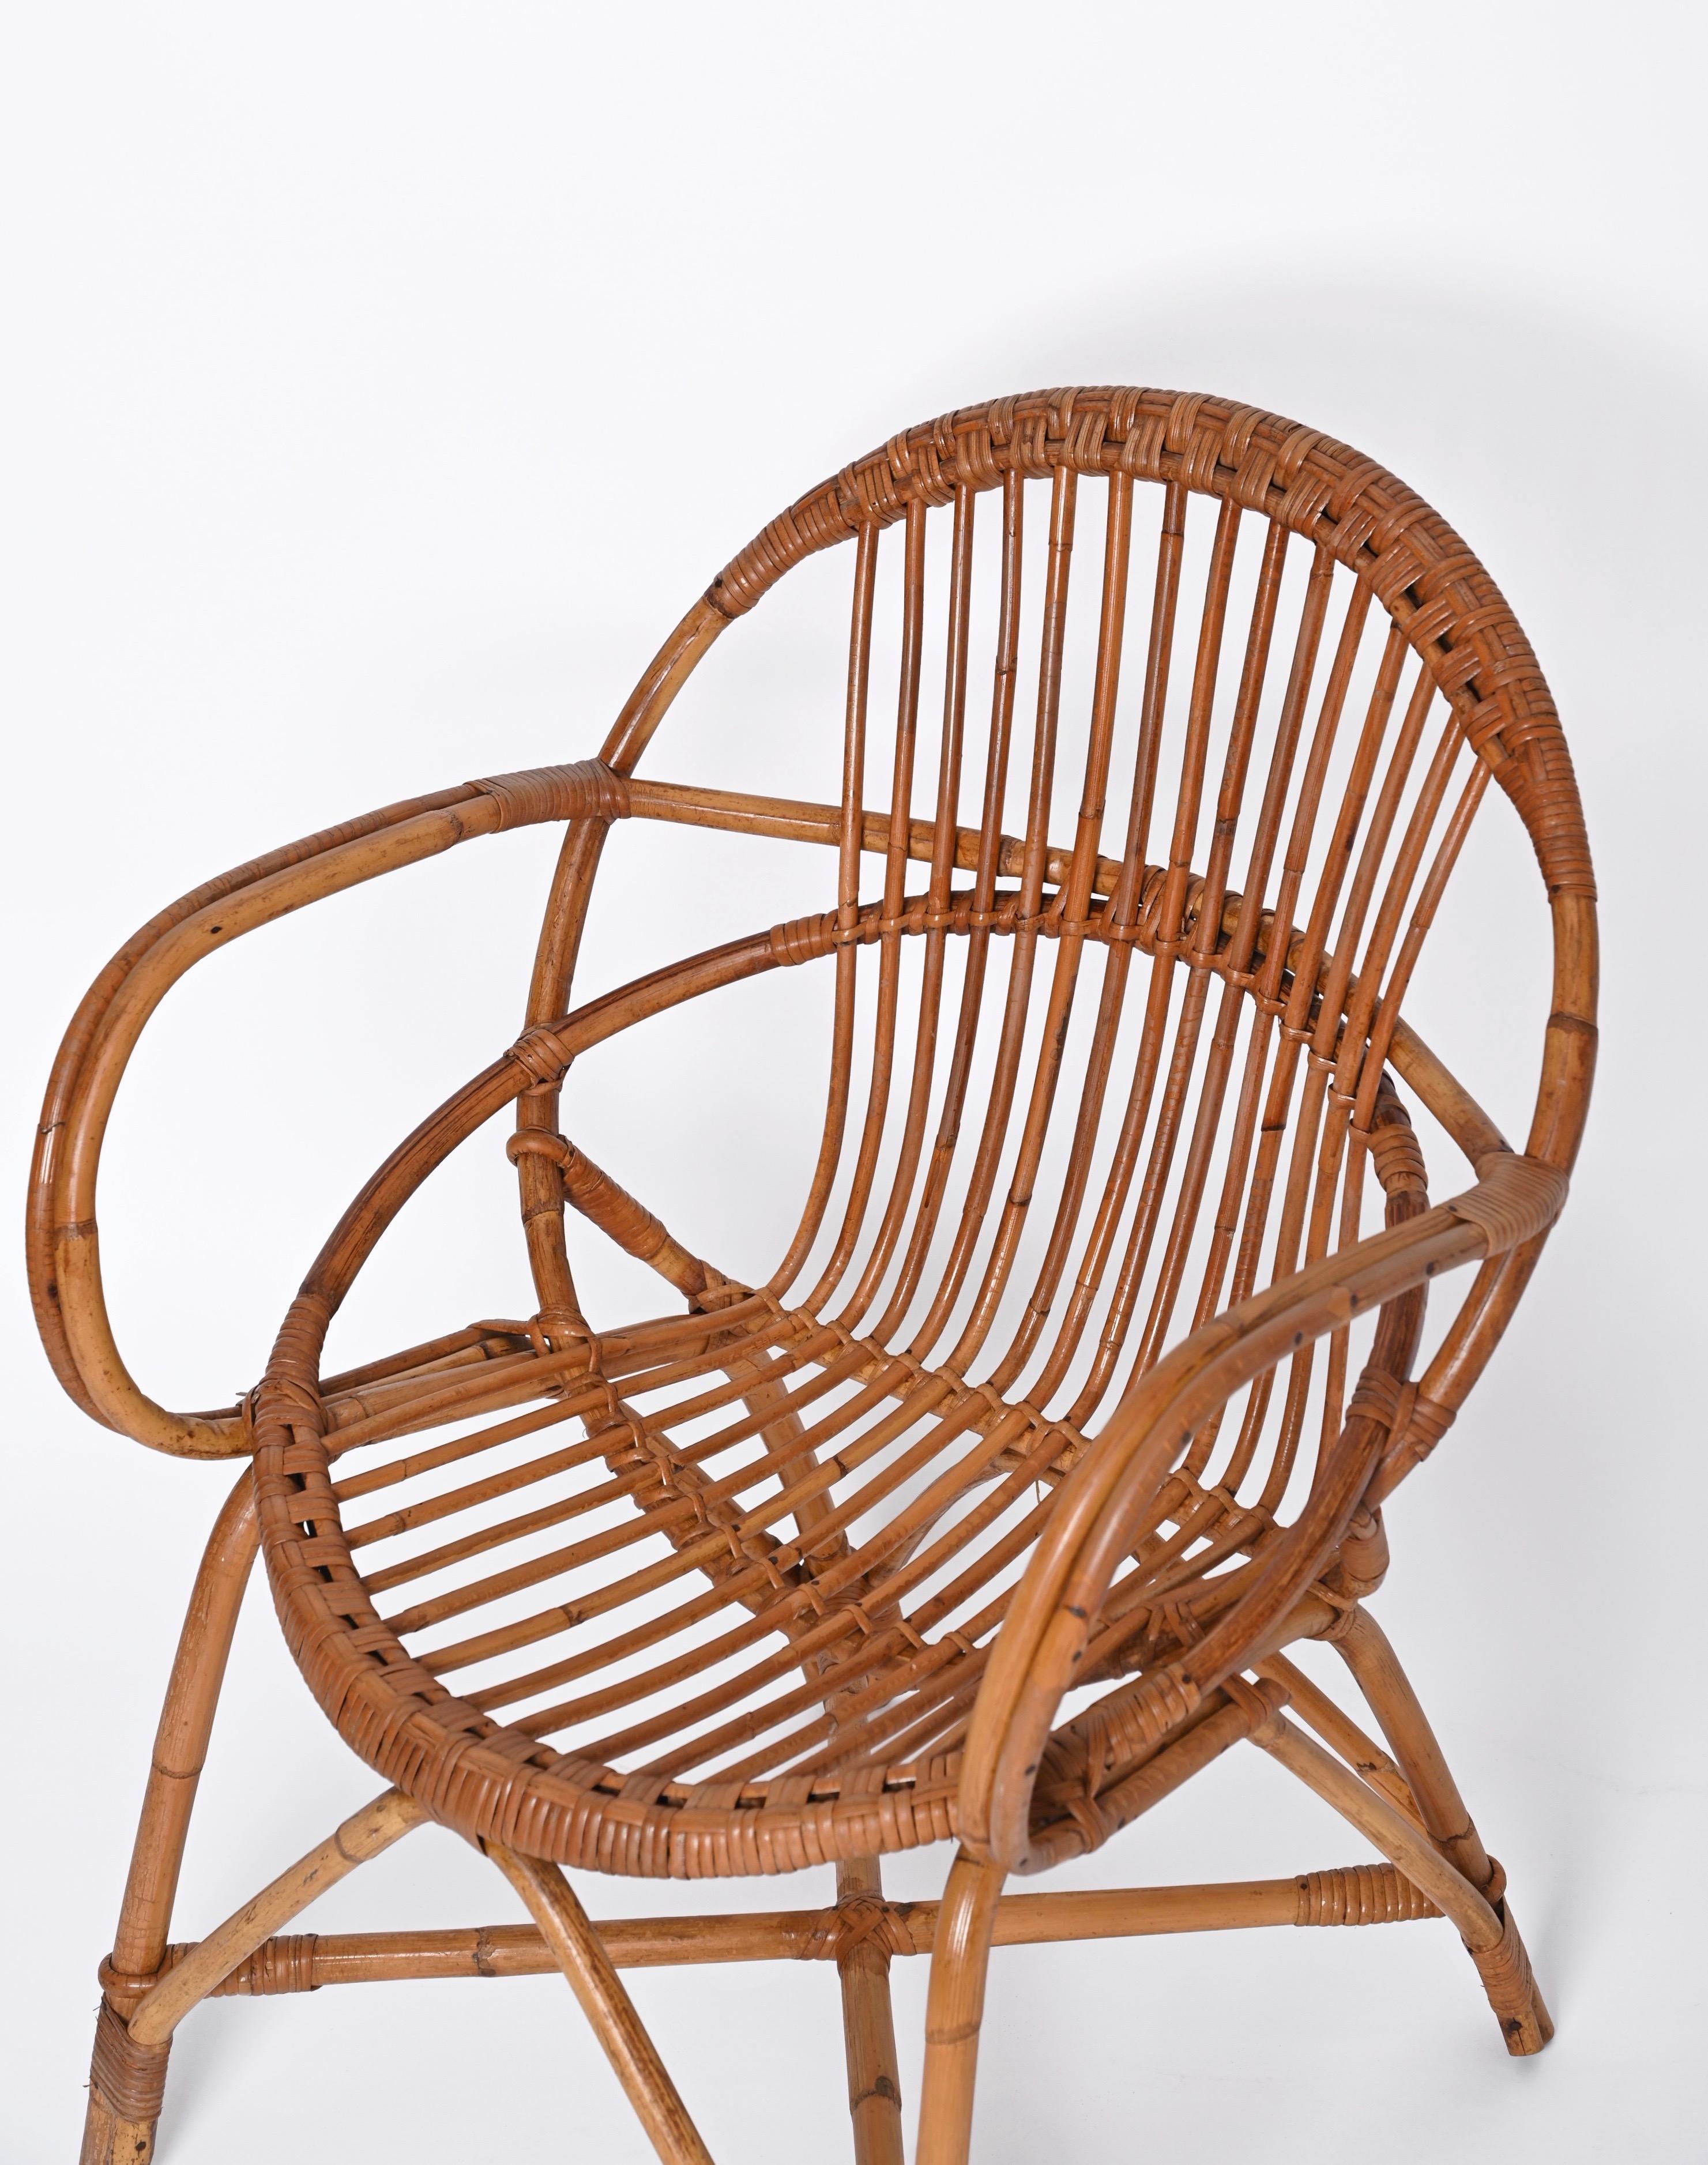 Midcentury Franco Albini Rattan and Bamboo Shell-Shaped Armchair, Italy, 1950s For Sale 1